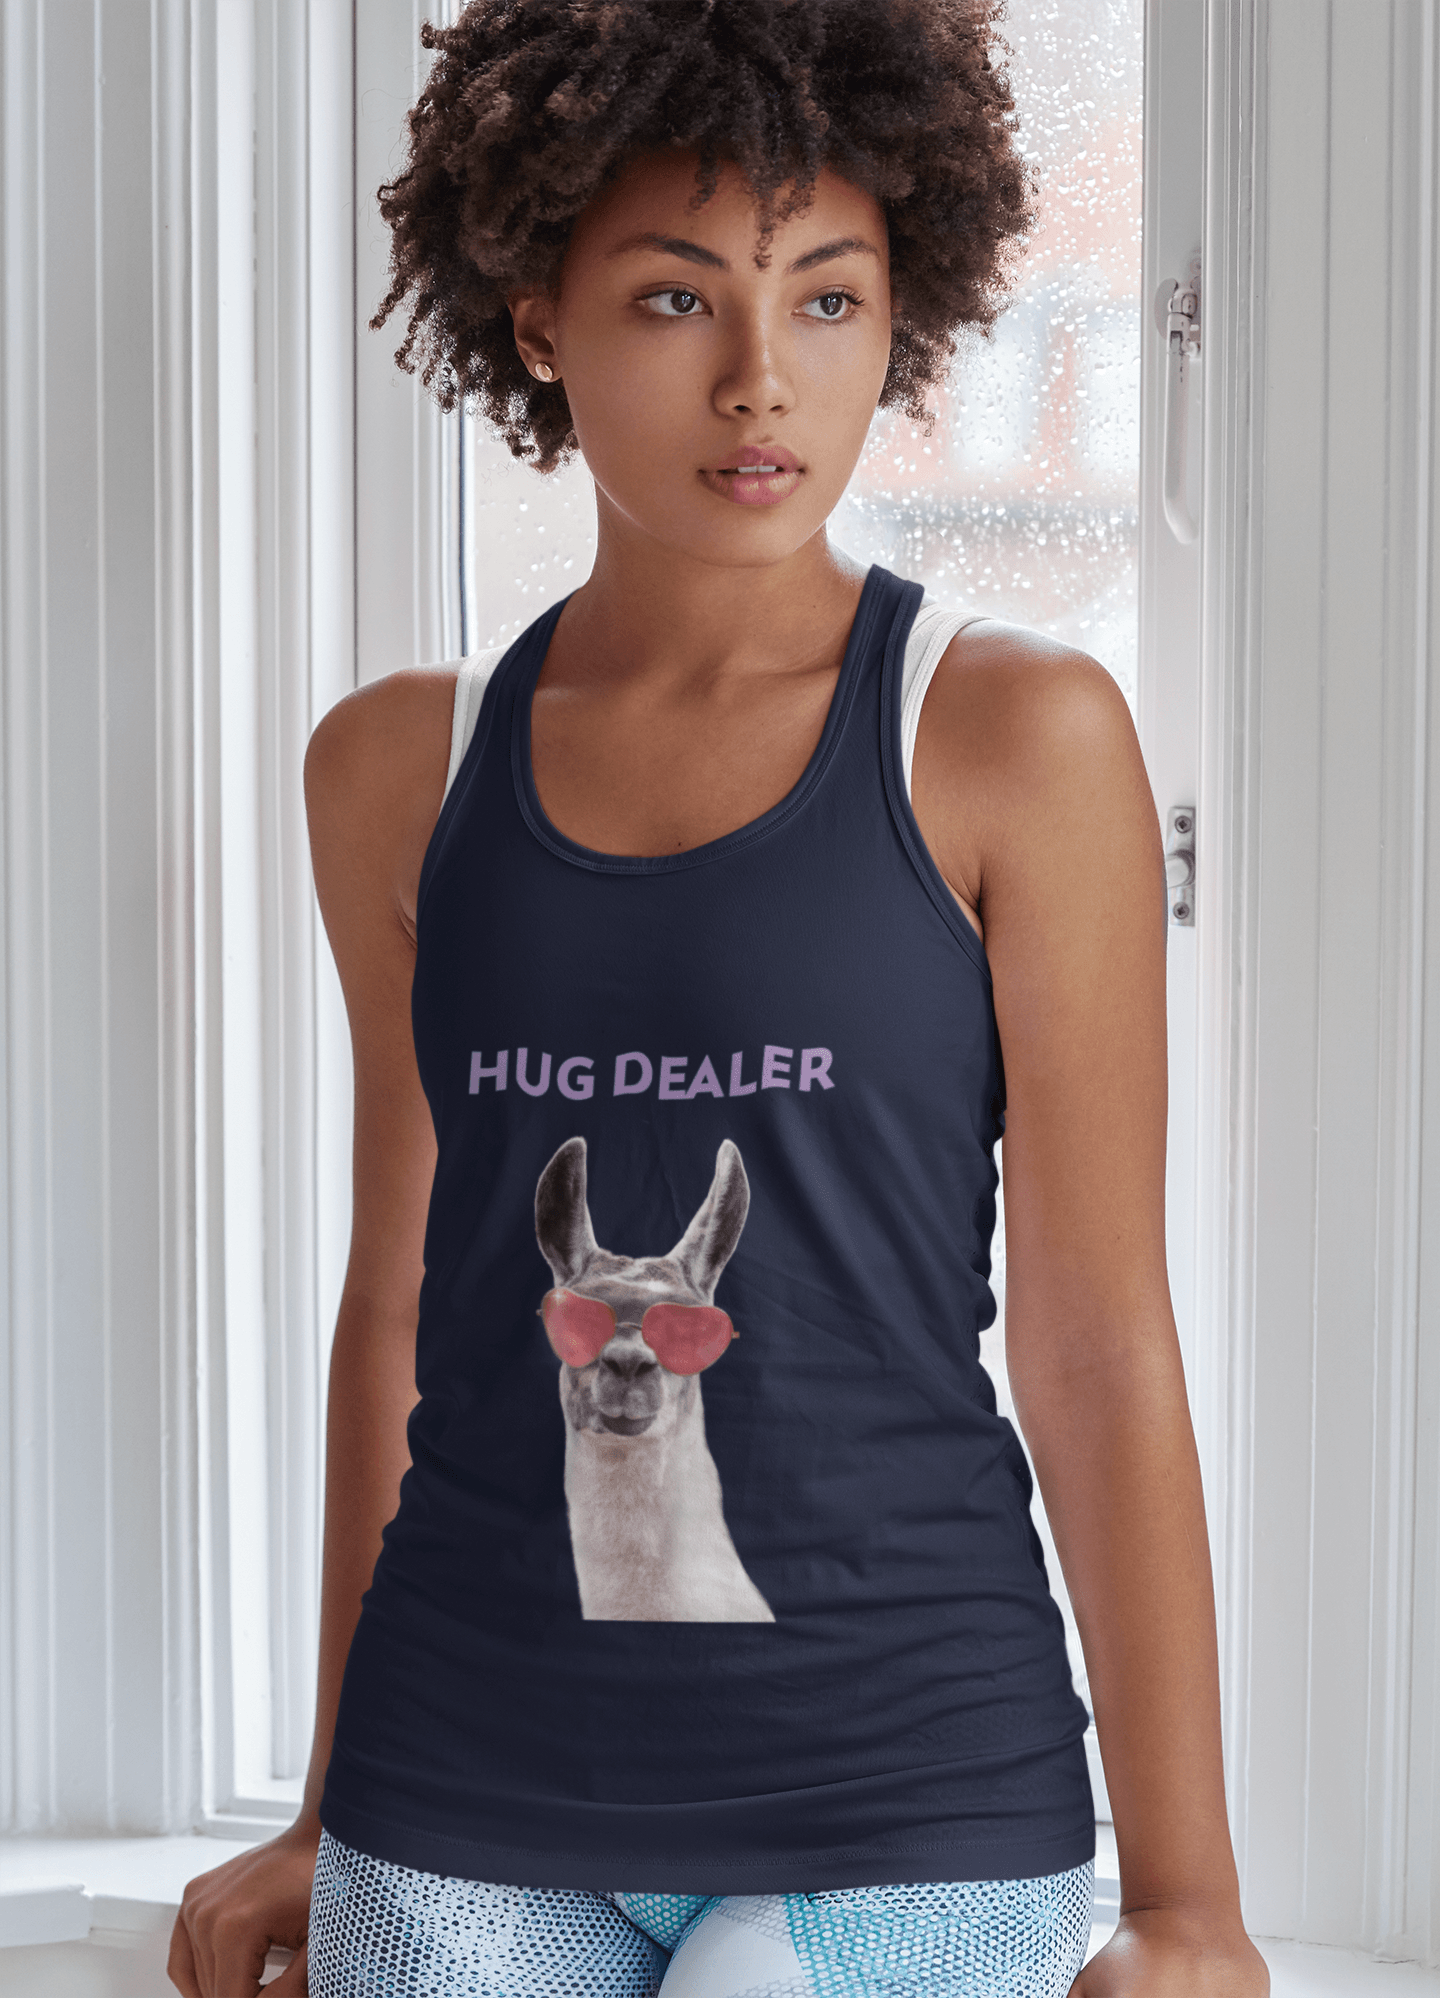 Hug Dealer Tank Top - The Accessorys Official